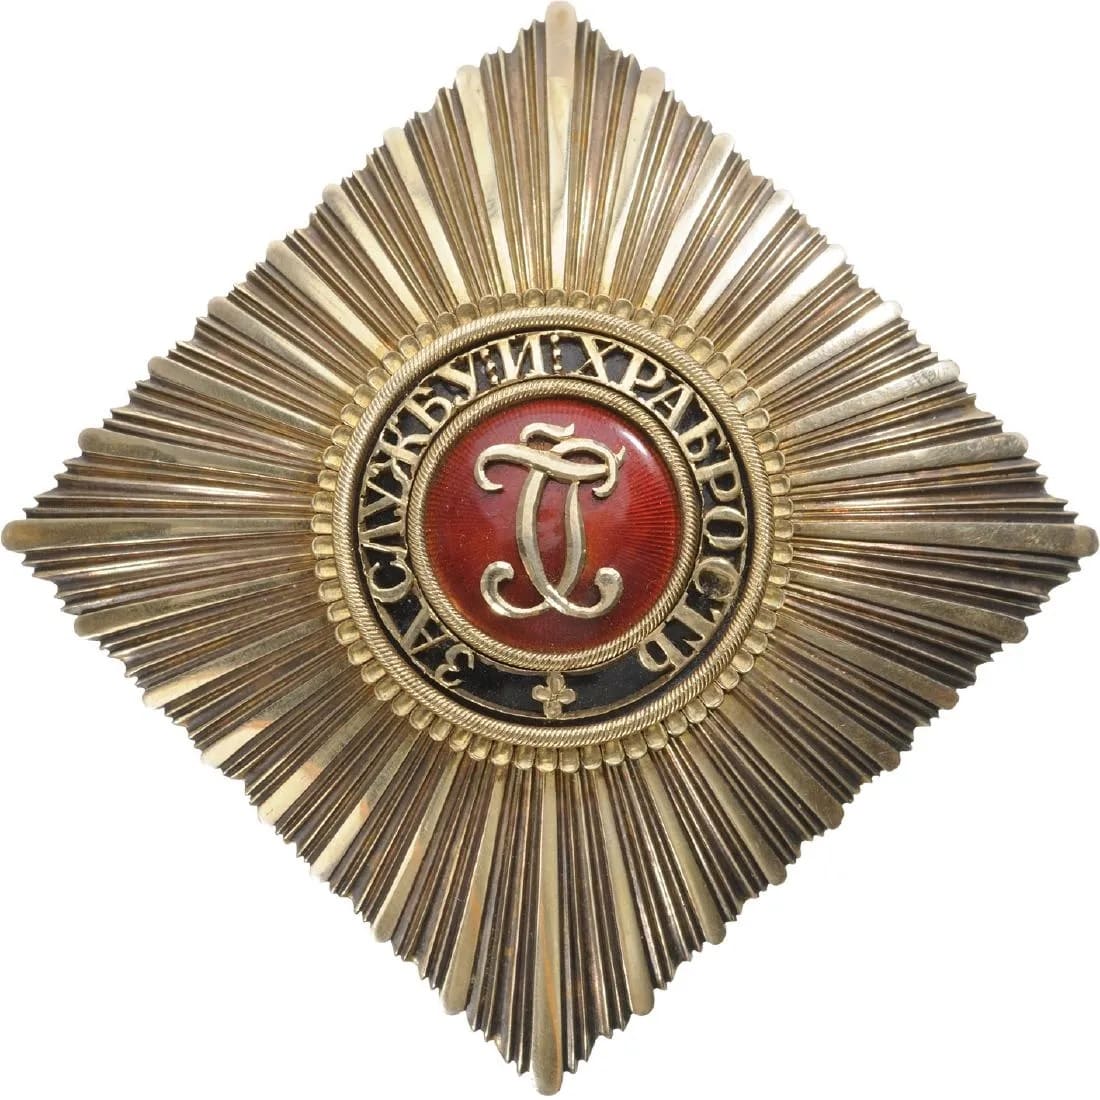 Order of St. George  made by Rothe.jpg